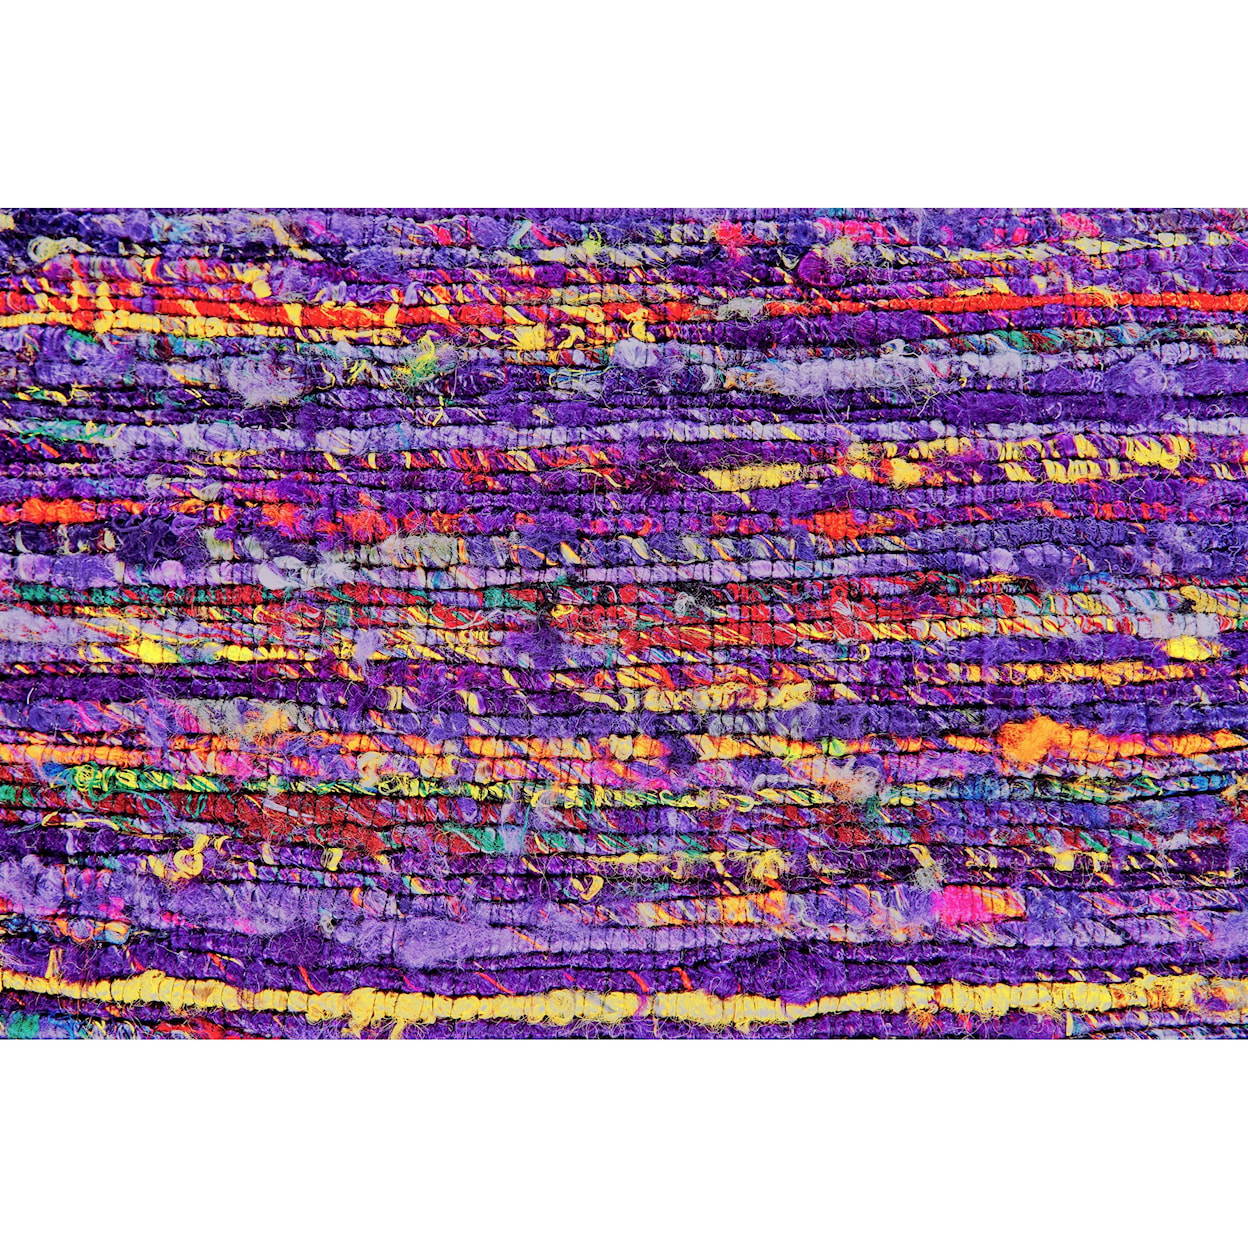 Feizy Rugs Arushi Purple 5' x 8' Area Rug